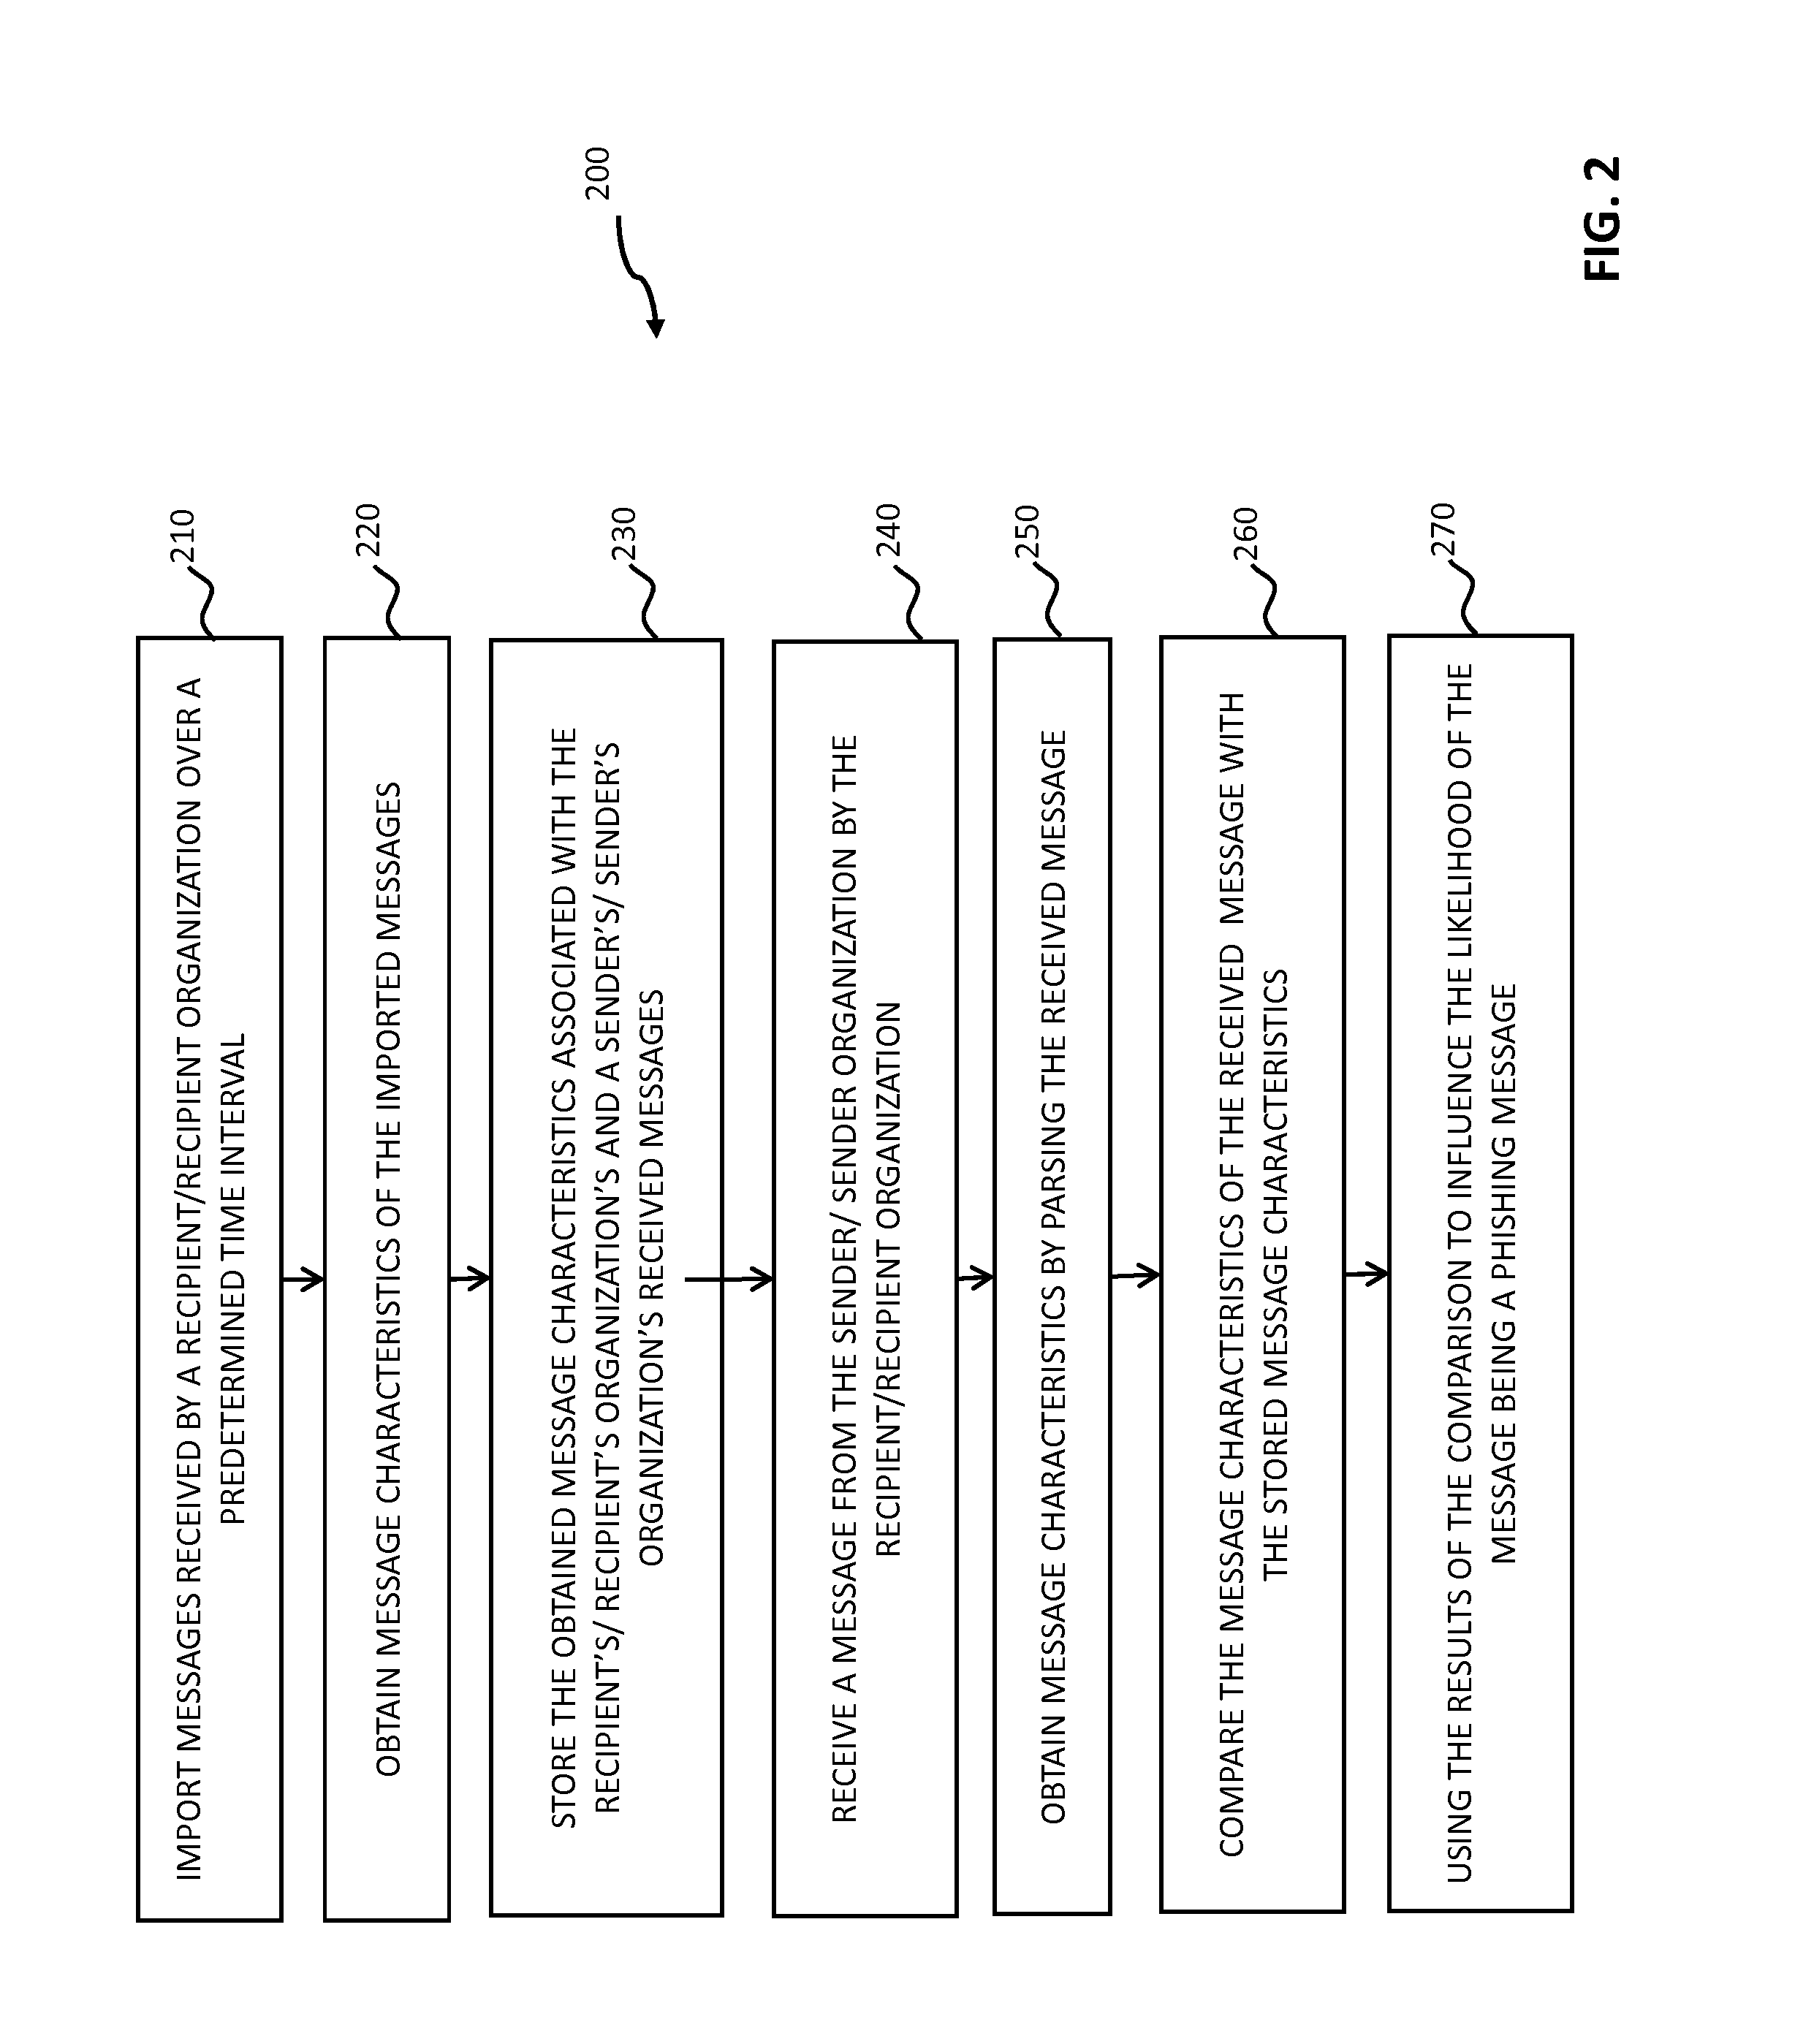 Systems and methods for electronic message analysis